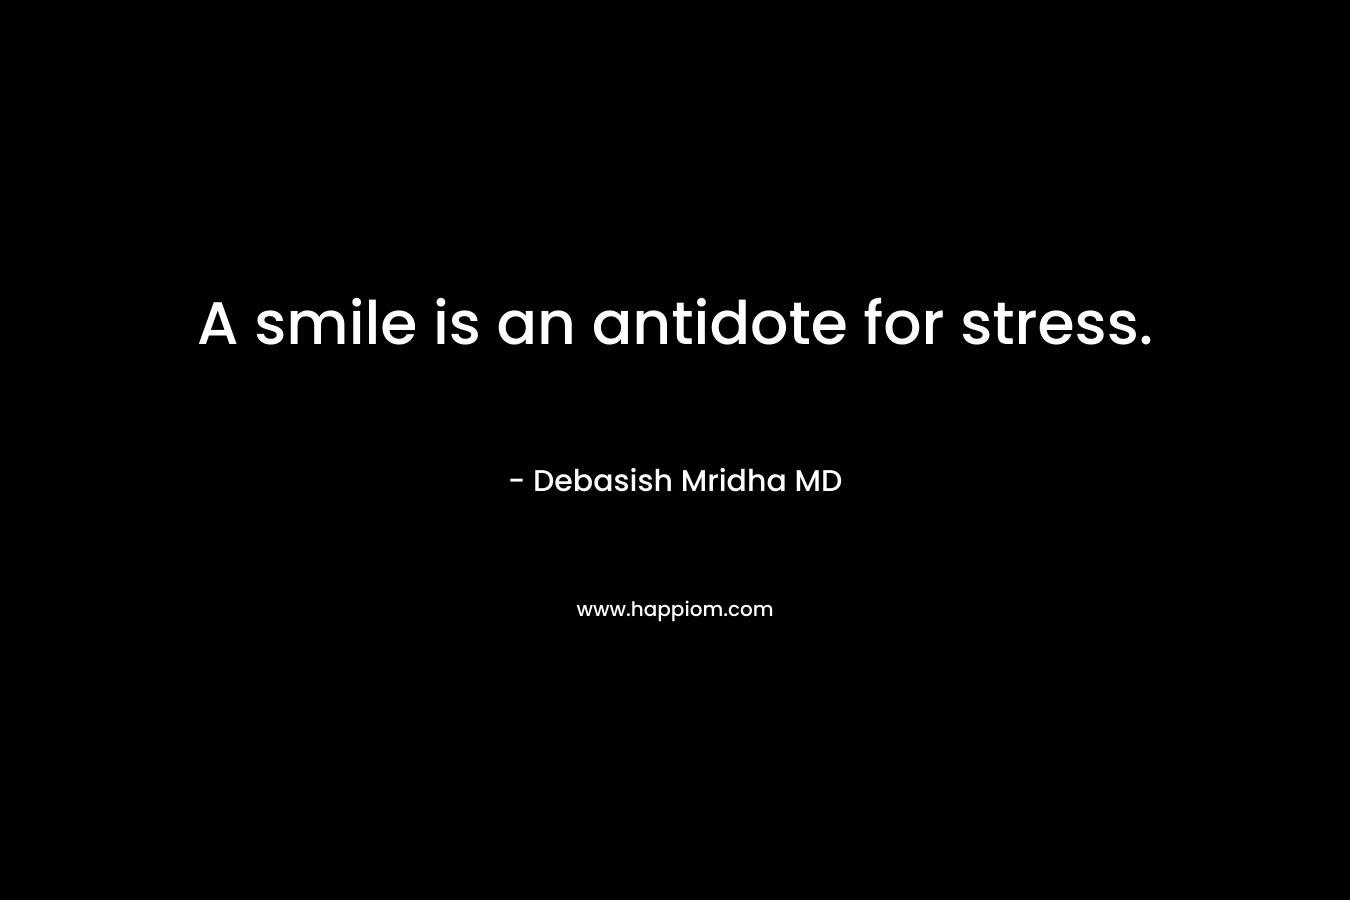 A smile is an antidote for stress.